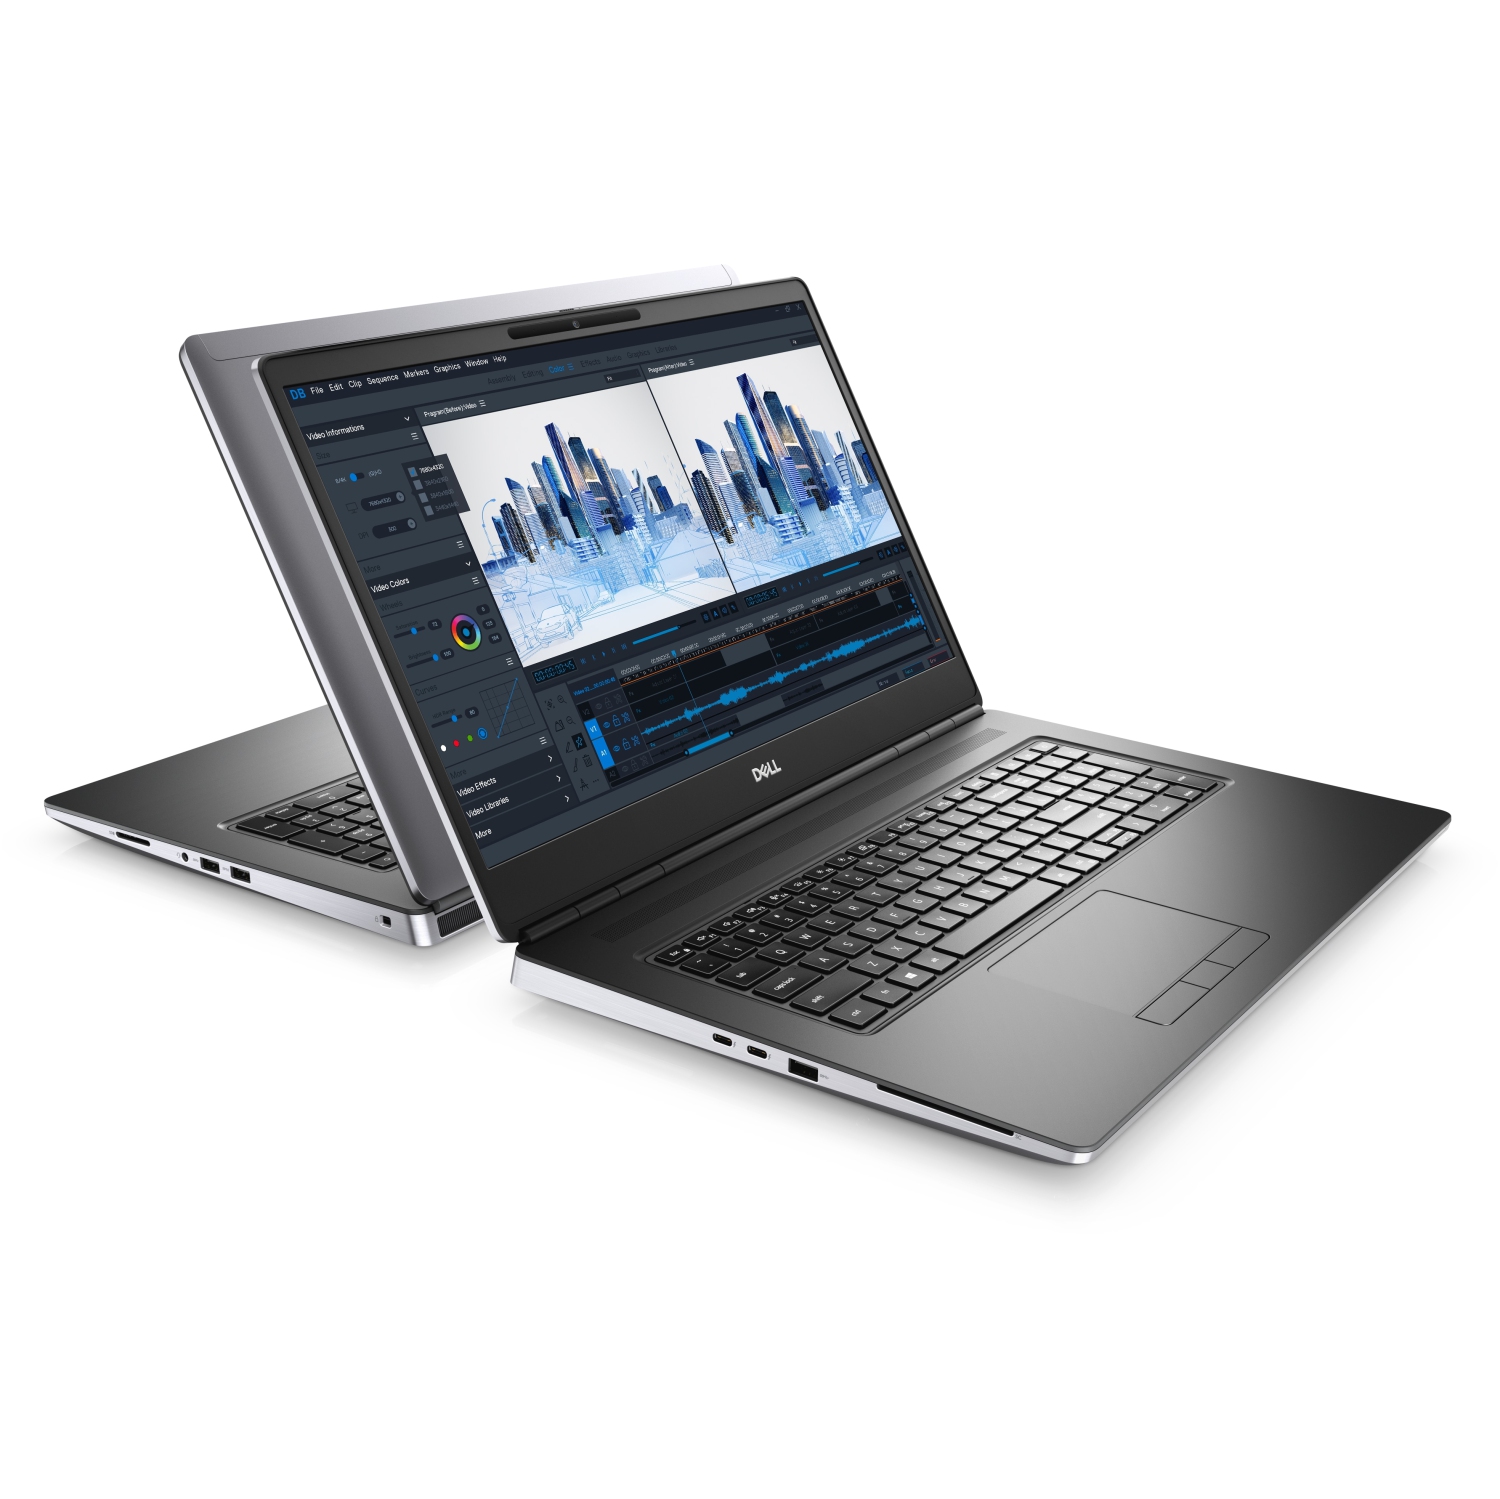 Refurbished (Excellent) - Dell Precision 7000 7760 Workstation Laptop (2021), 17.3" 4K, Core i9, 2TB SSD, 64GB RAM, RTX A5000, 8 Cores @ 5 GHz, 11th Gen CPU Certified